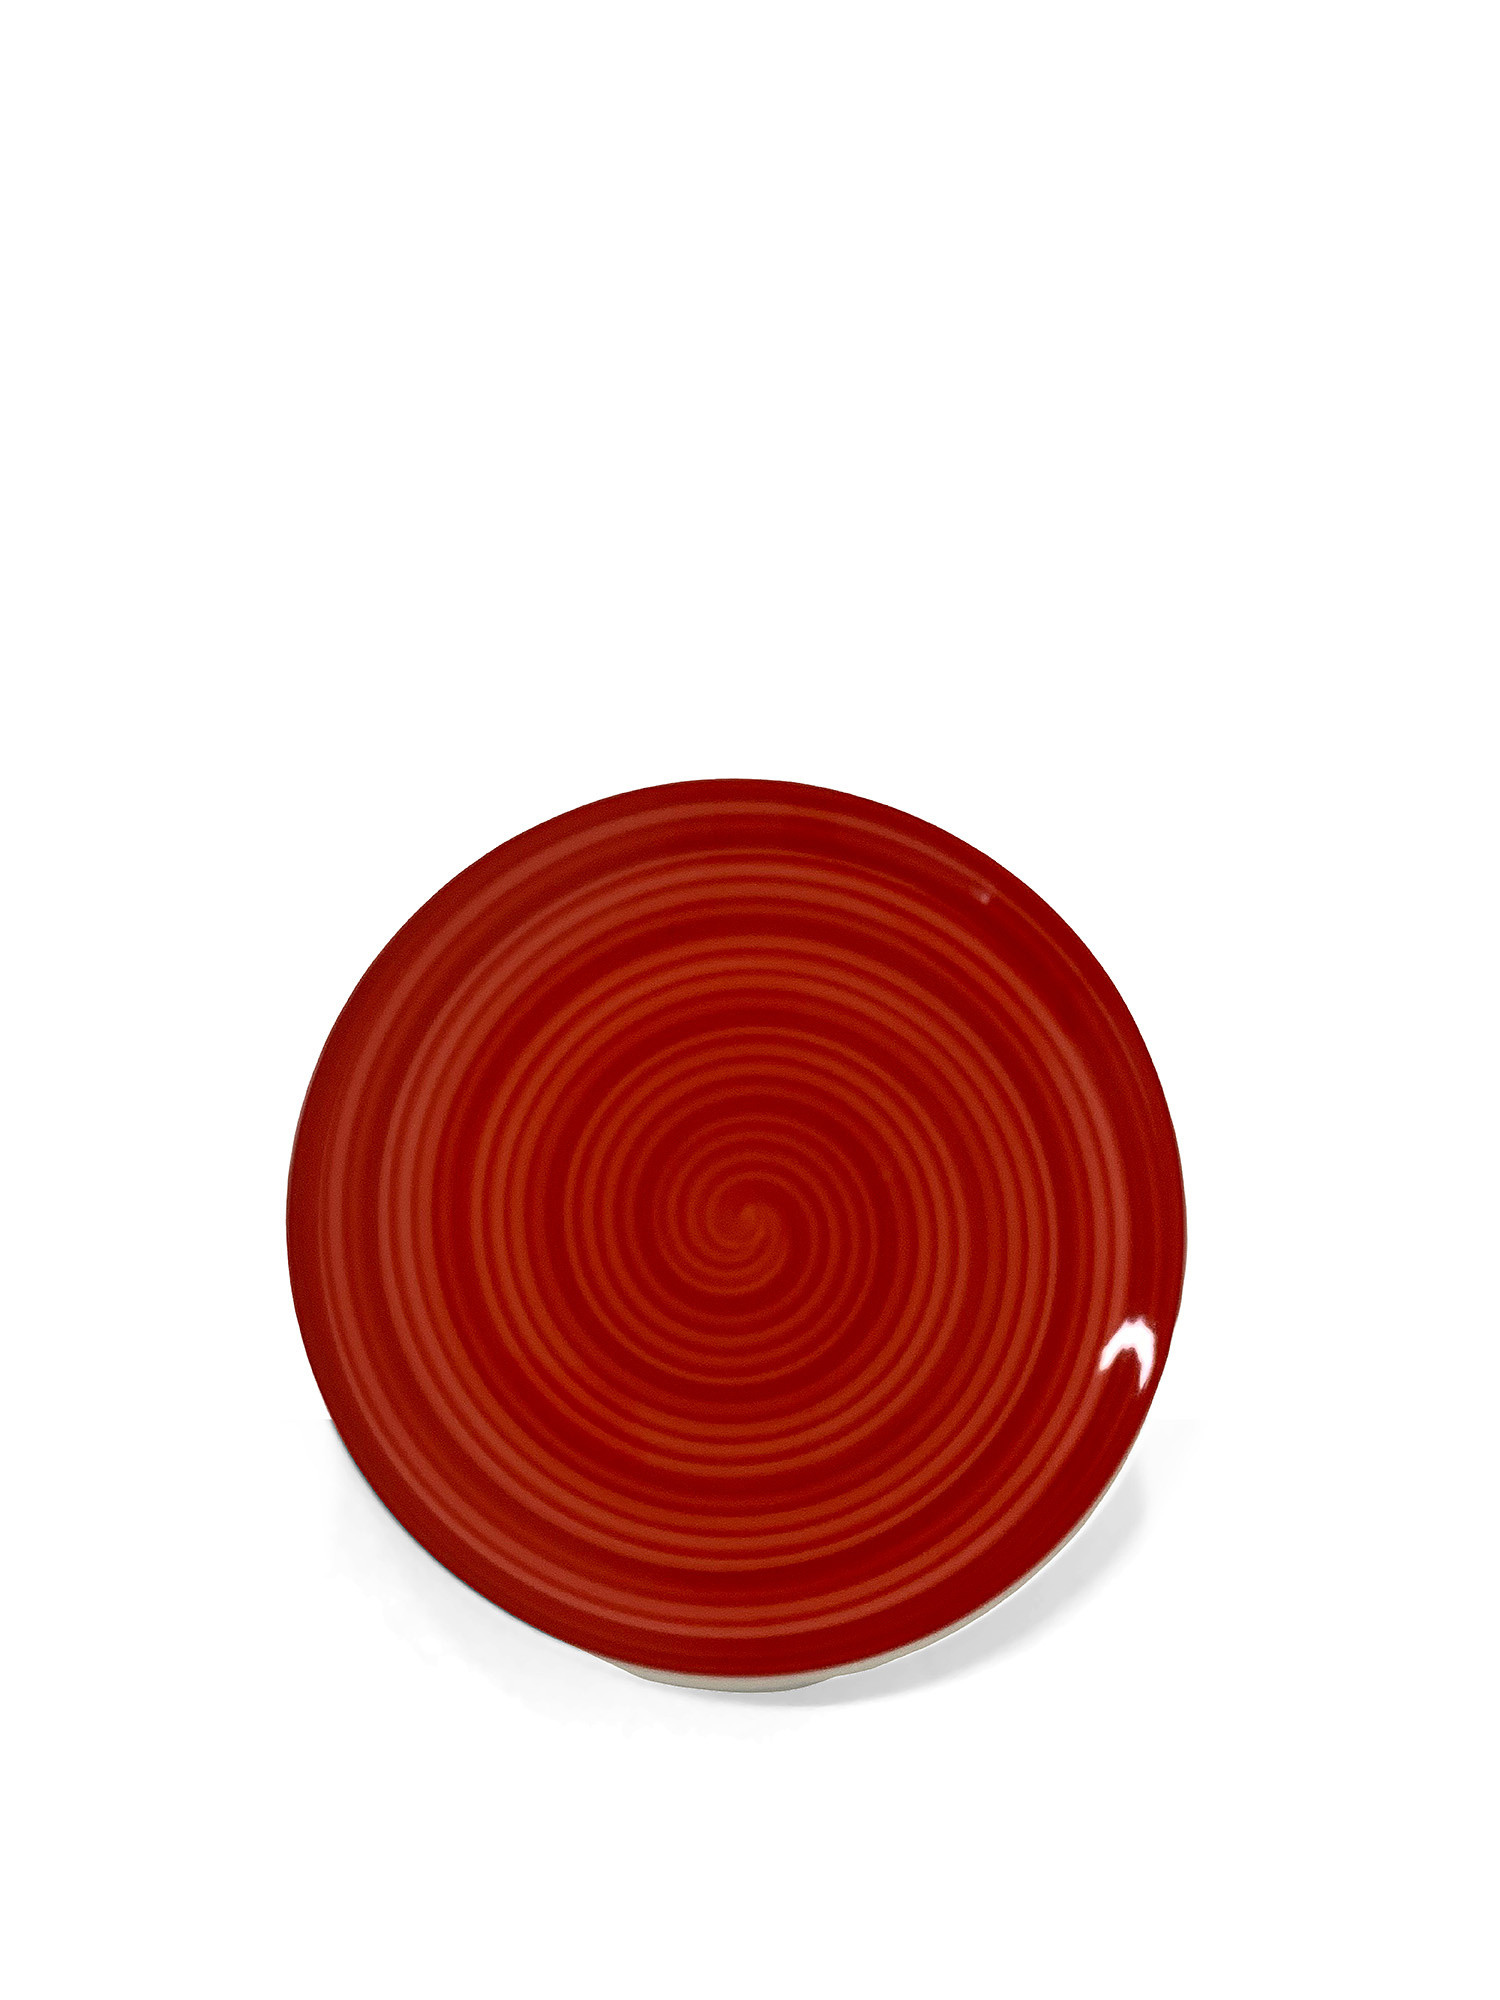 Spiral hand painted ceramic fruit plate, Red, large image number 0